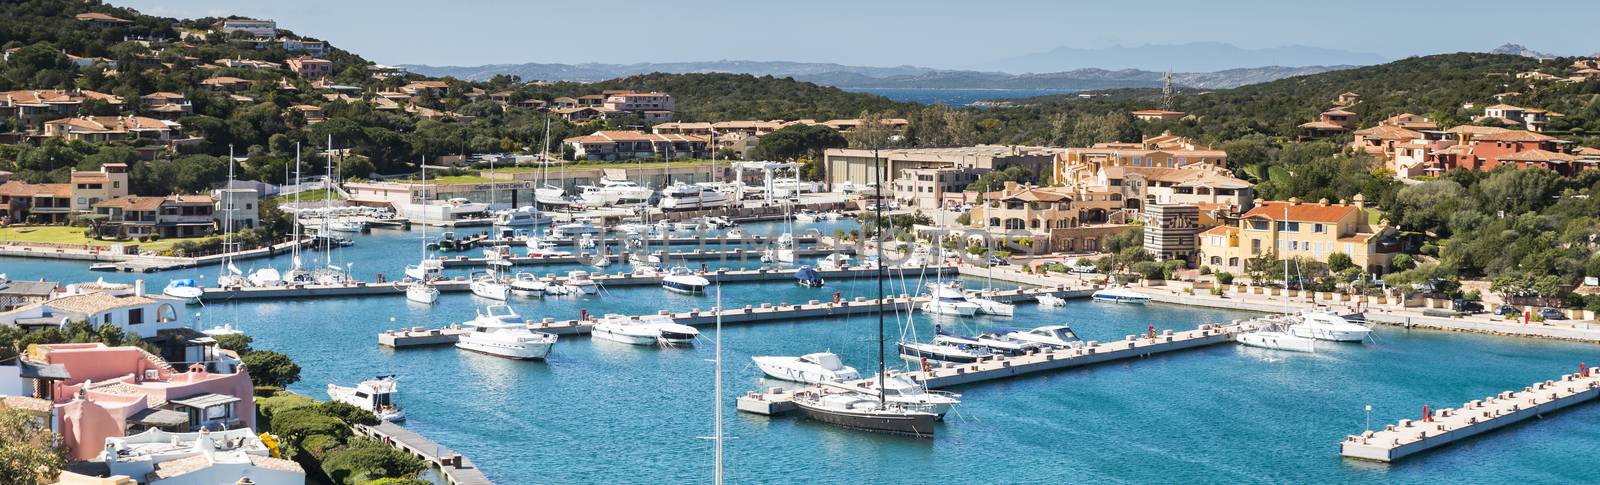 Boats in the harbor of porto servo, the exclusive village on sardinia where in the summer the rich and famous have their vacations